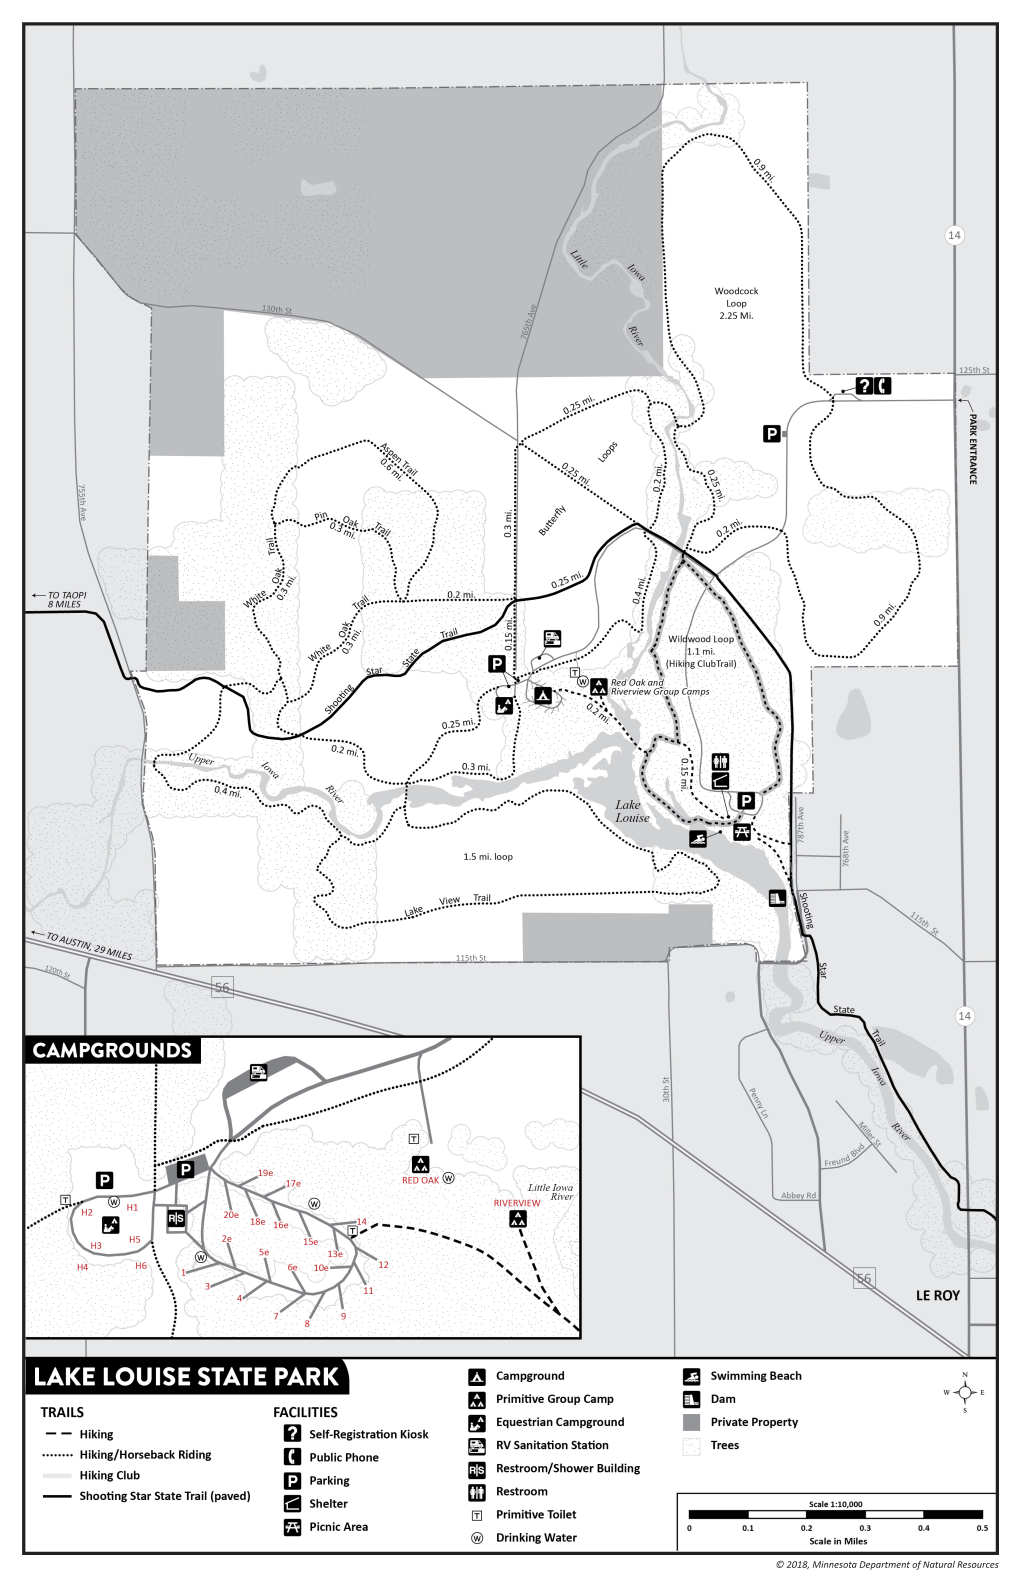 Map of Lake Louise State Park Trails and Facilities